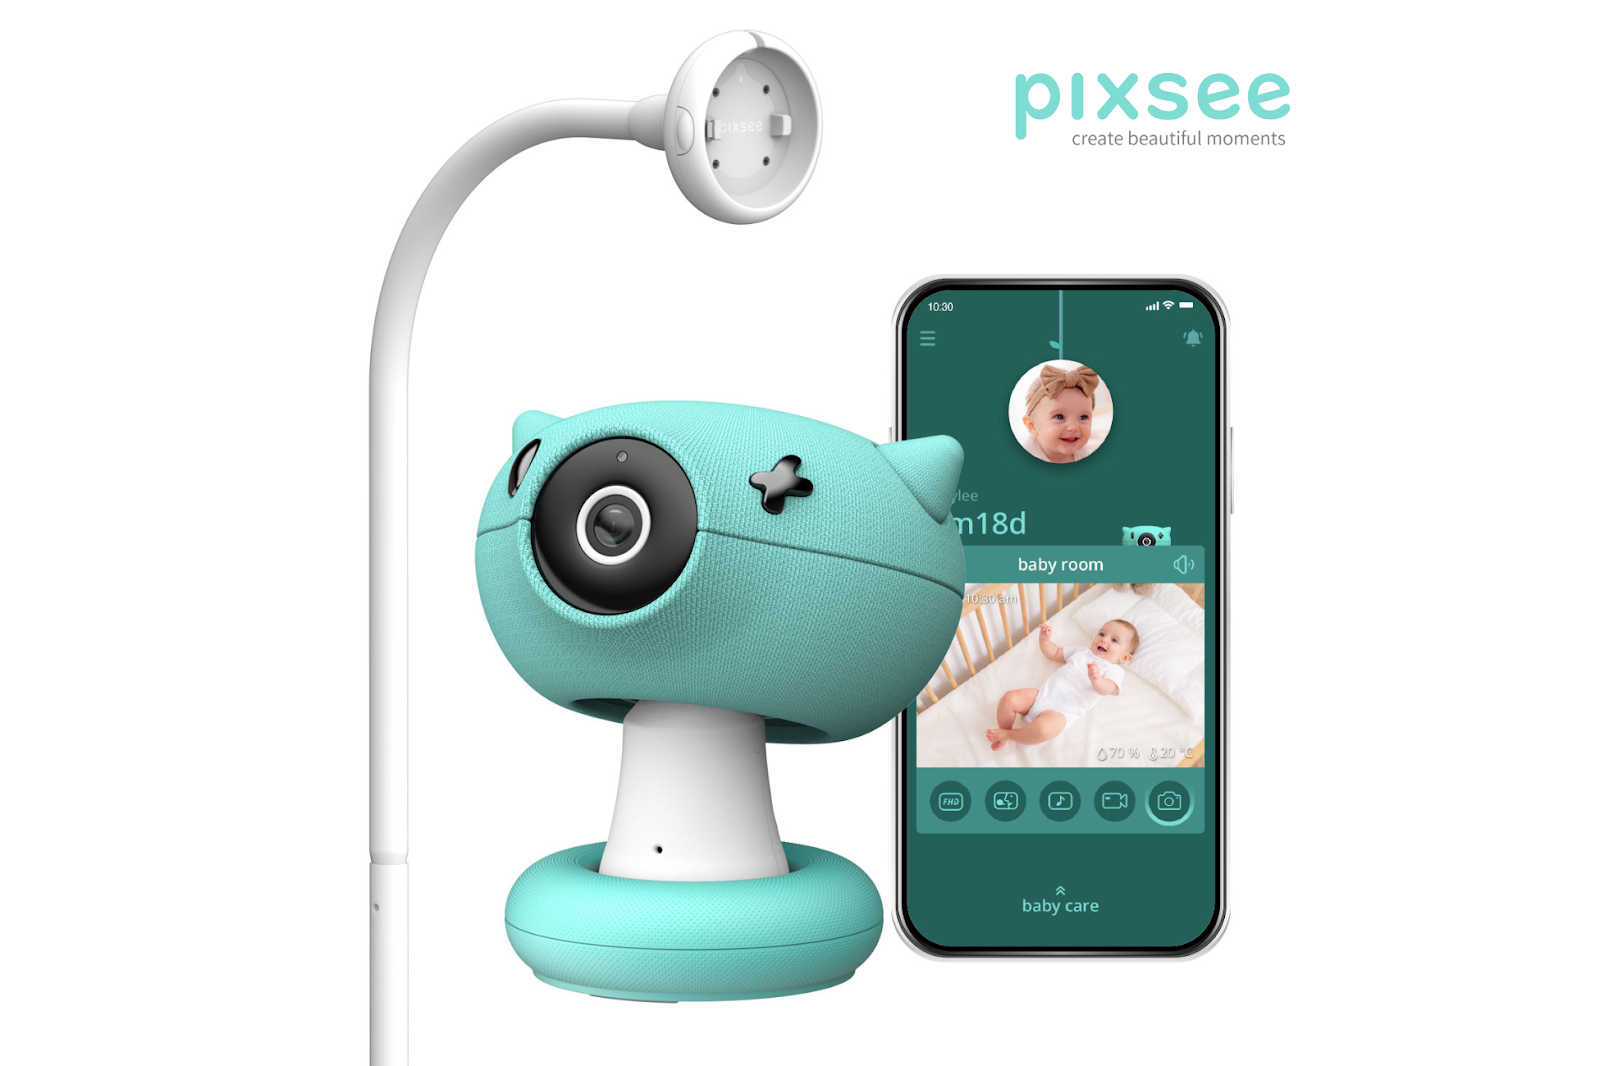 baby registry must haves: smart baby monitor